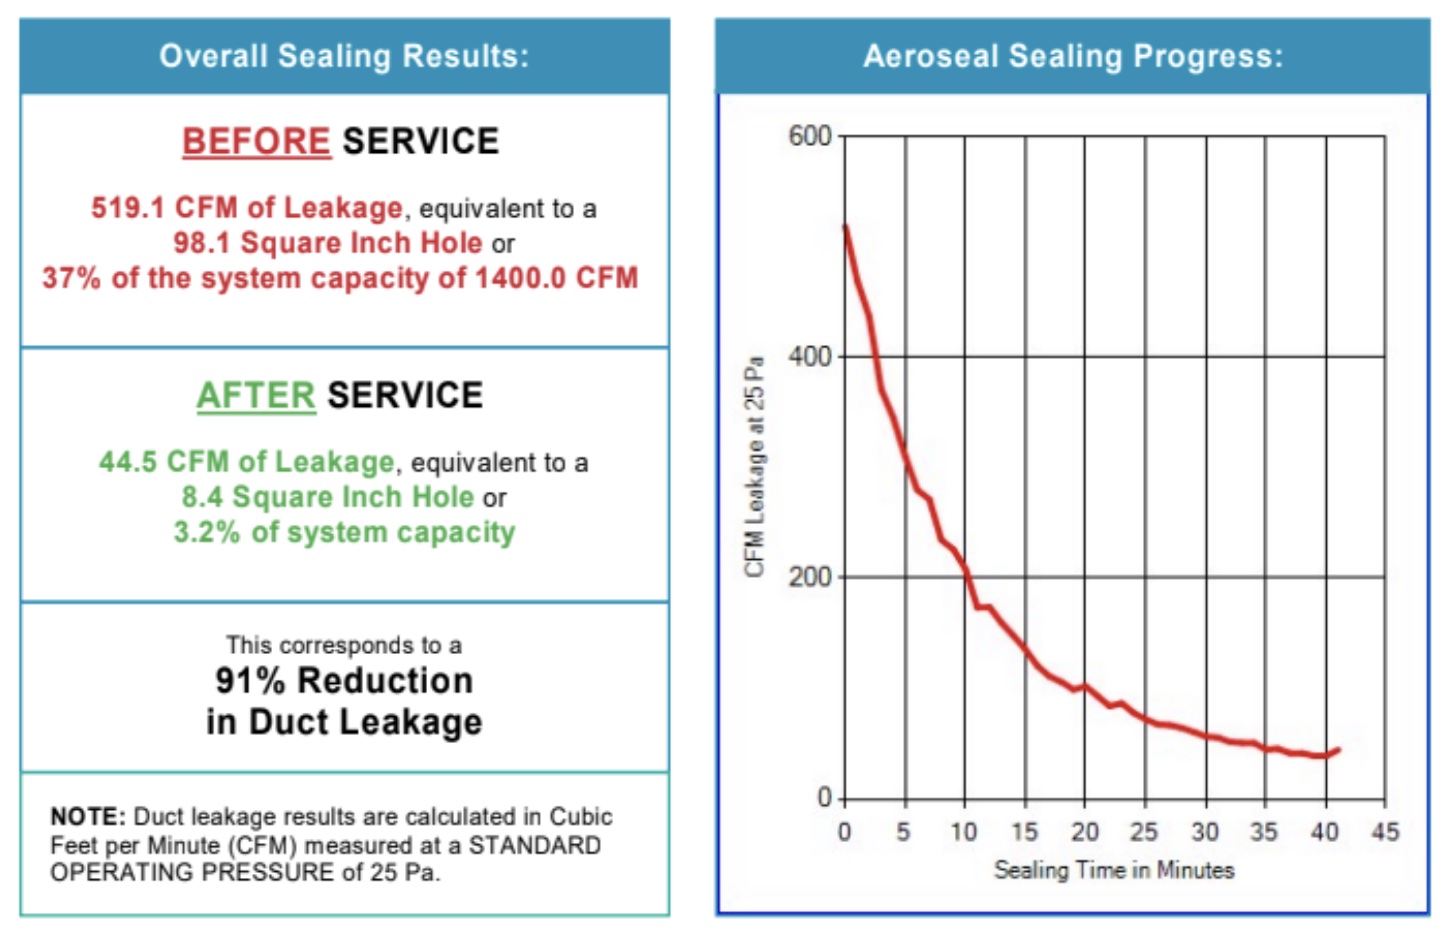 The results of our Aeroseal process